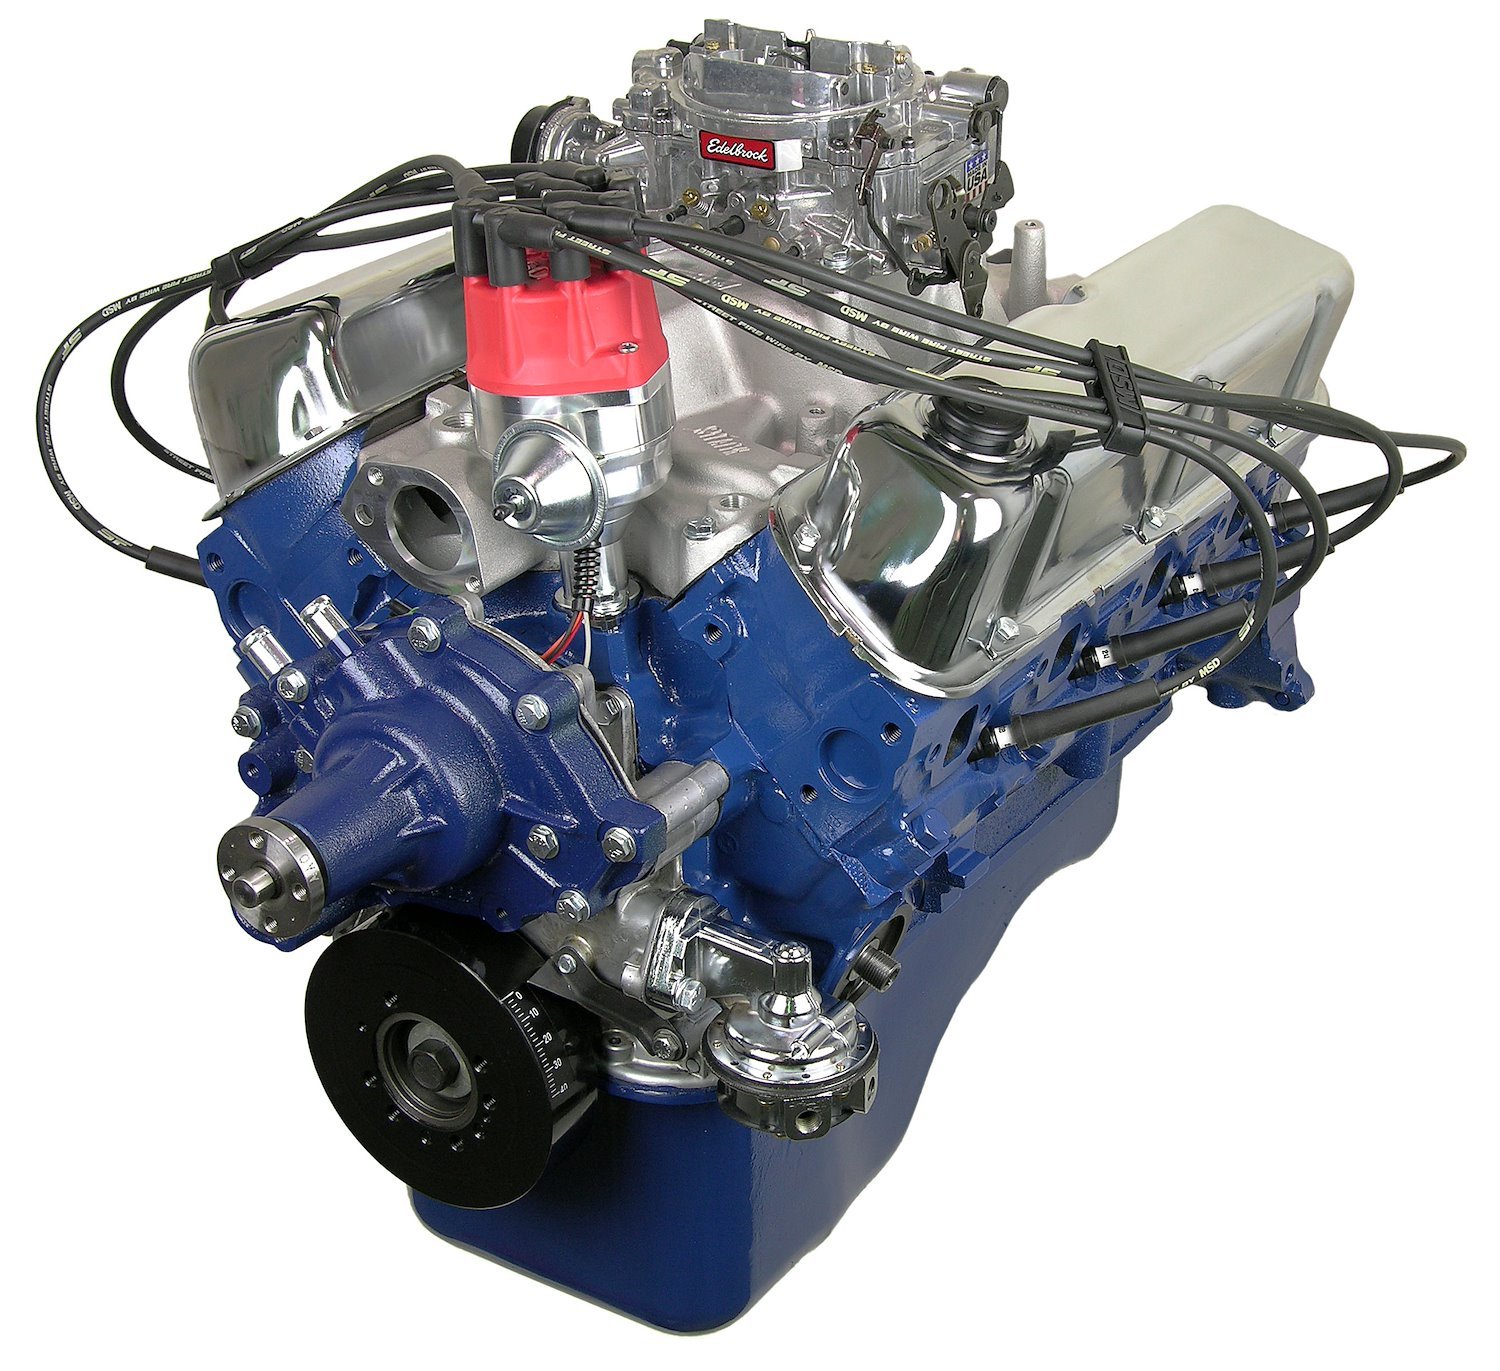 HP79C High-Performance Ford Small Block 302 ci. Crate Engine [300 HP/336 TQ]